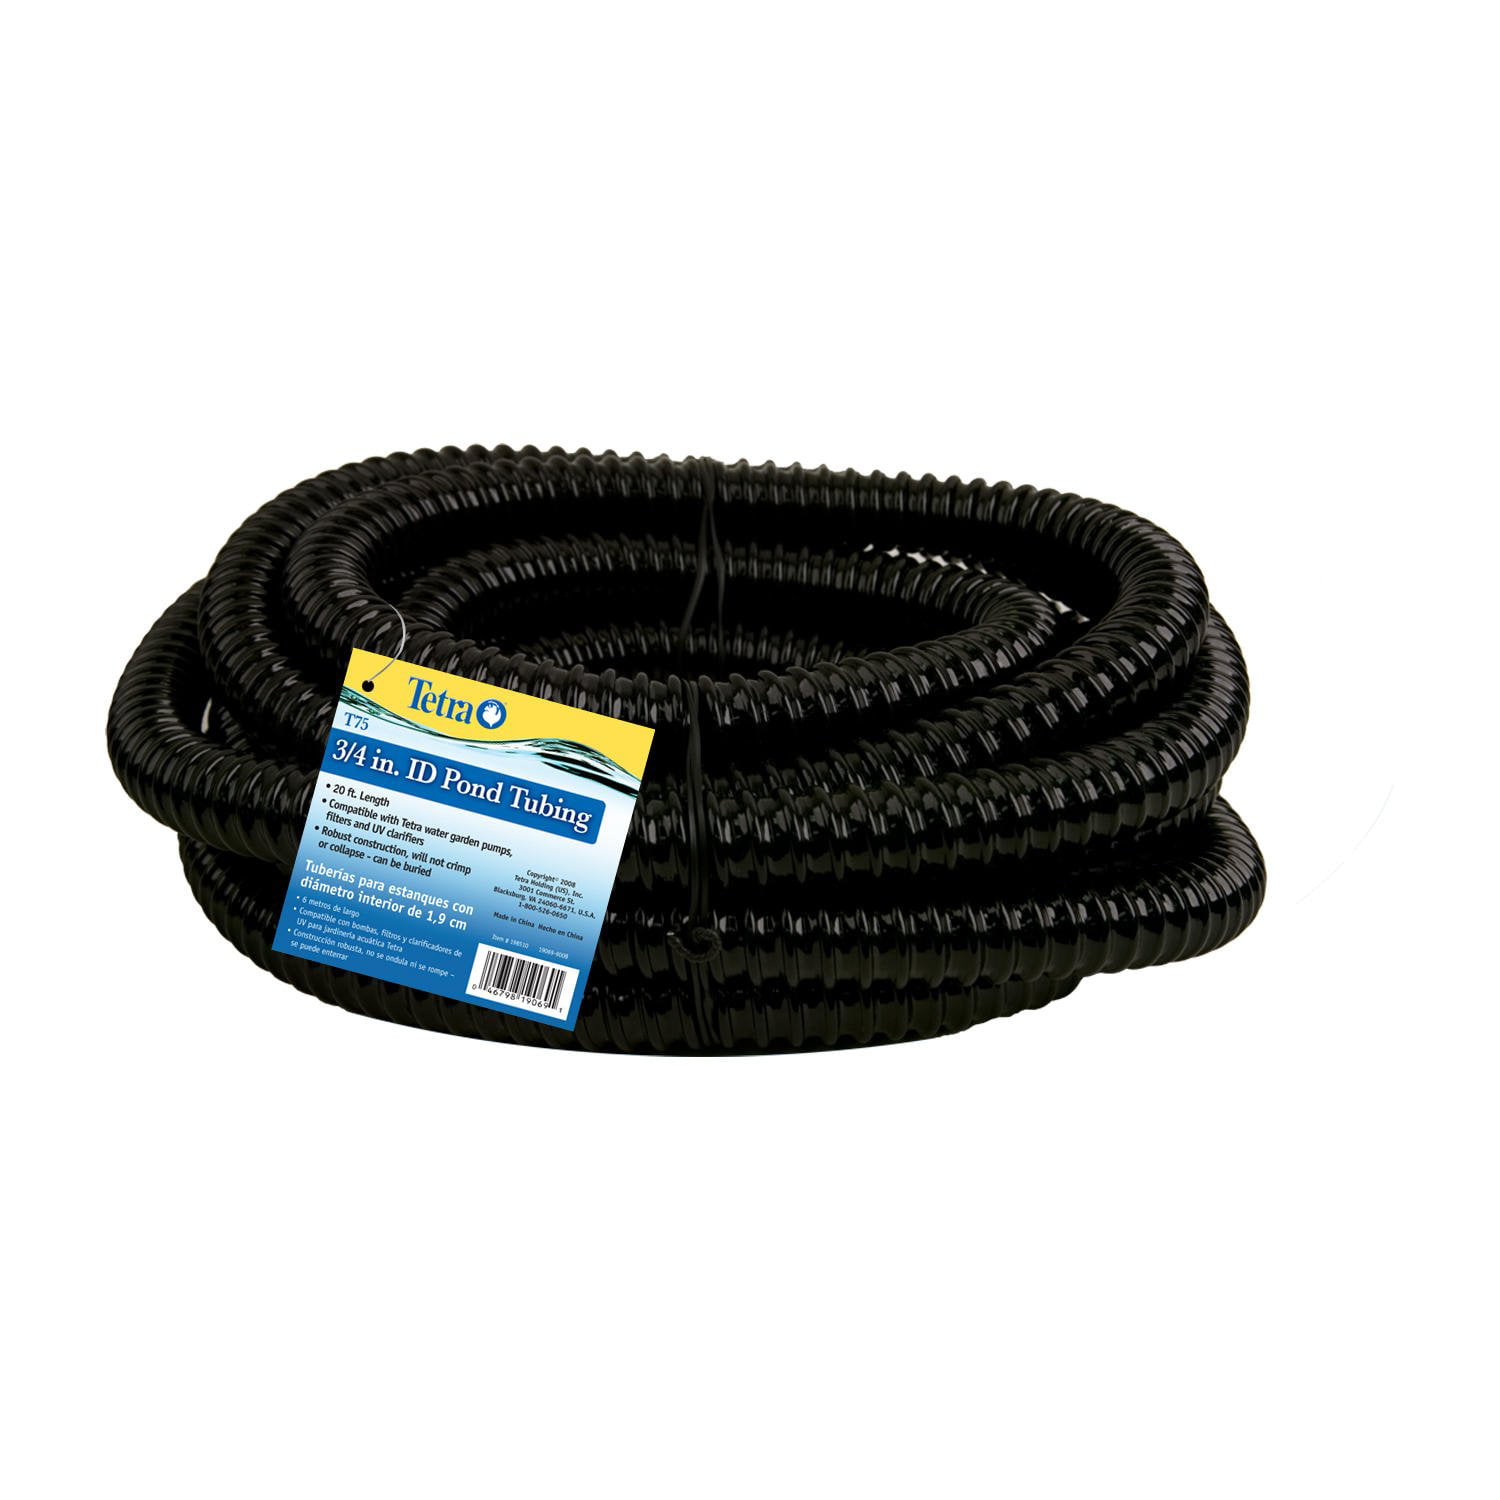 UL 3/4" x 25' Non Kink Corrugated Pond Tubing for Water Garden & Koi Ponds 